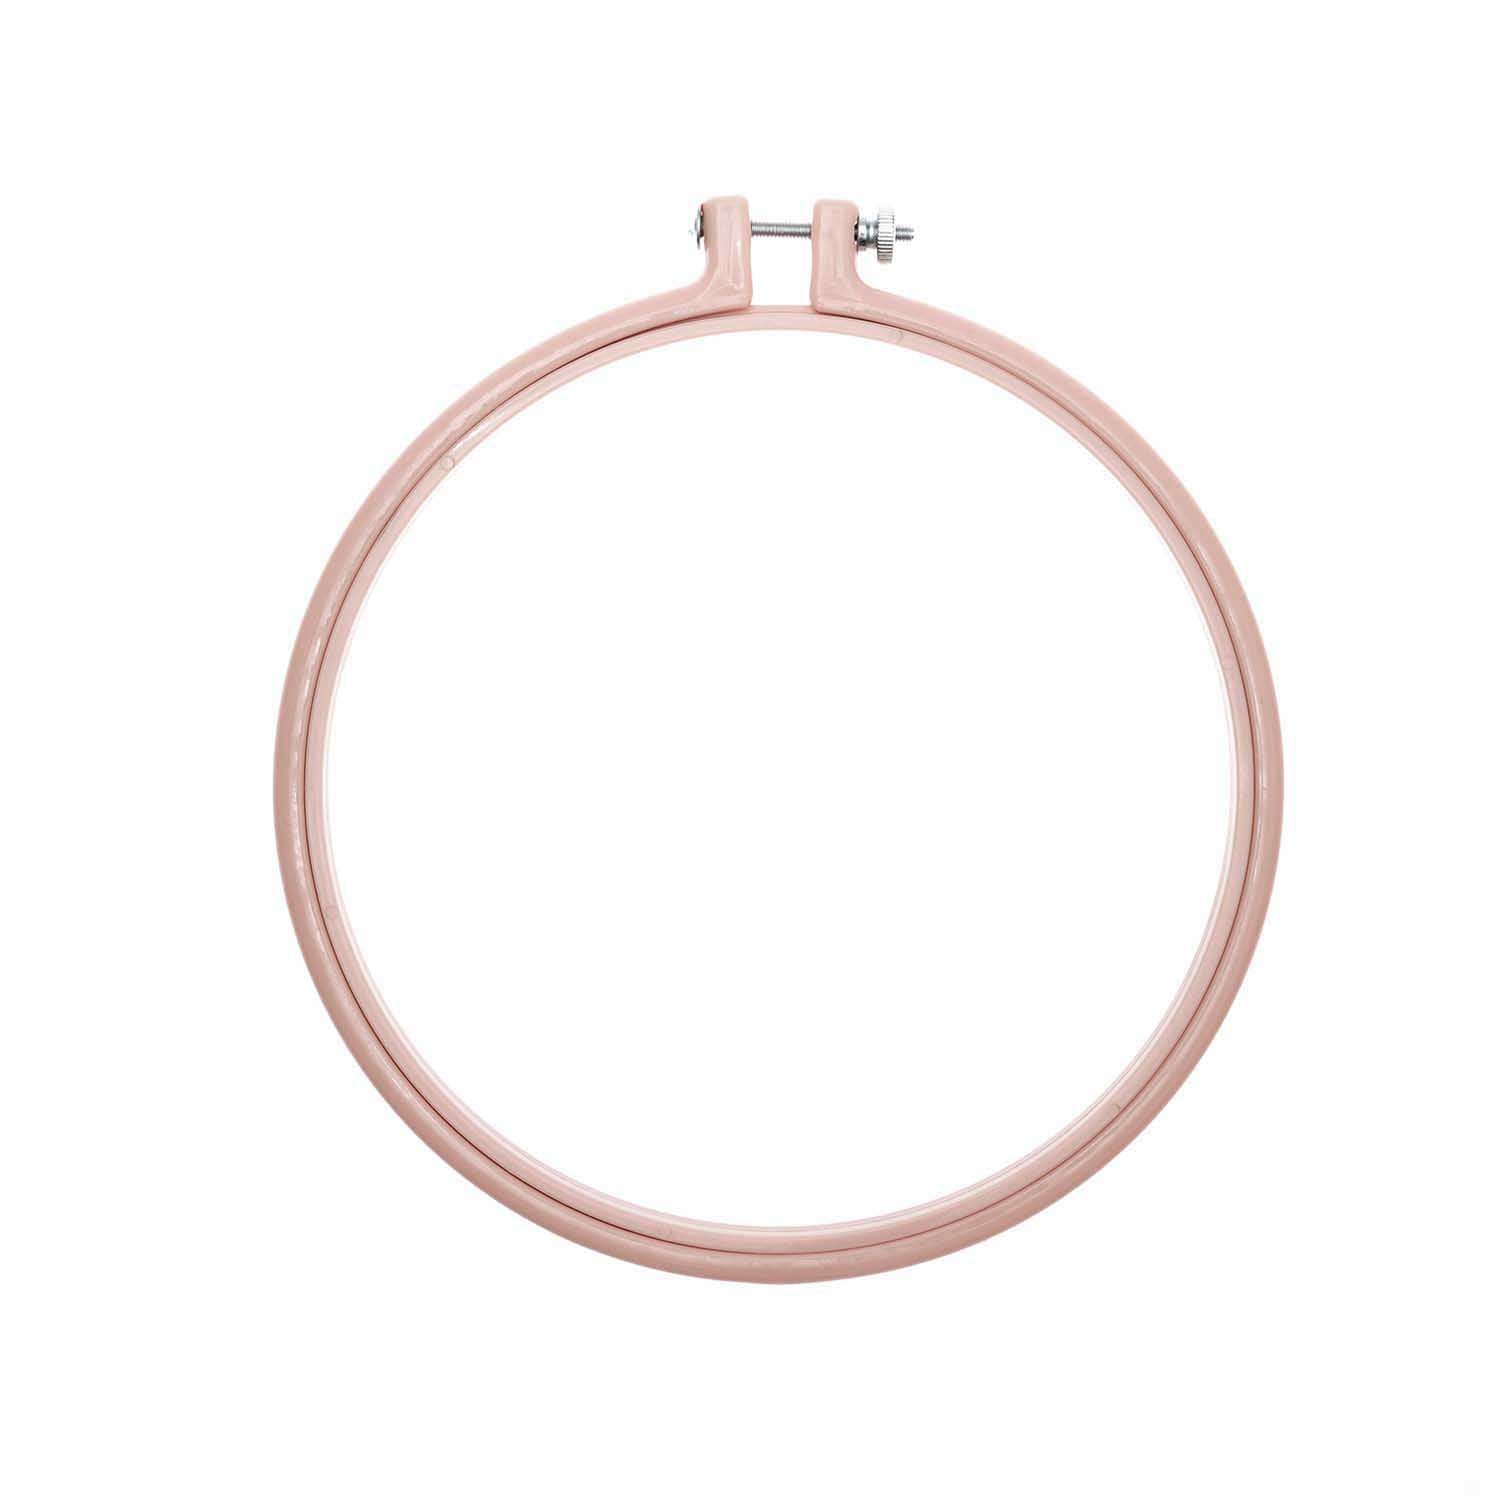 Powder Pink Coloured Embroidery Hoop 18cm / 7" - by Rico Design - Stitch Happy.